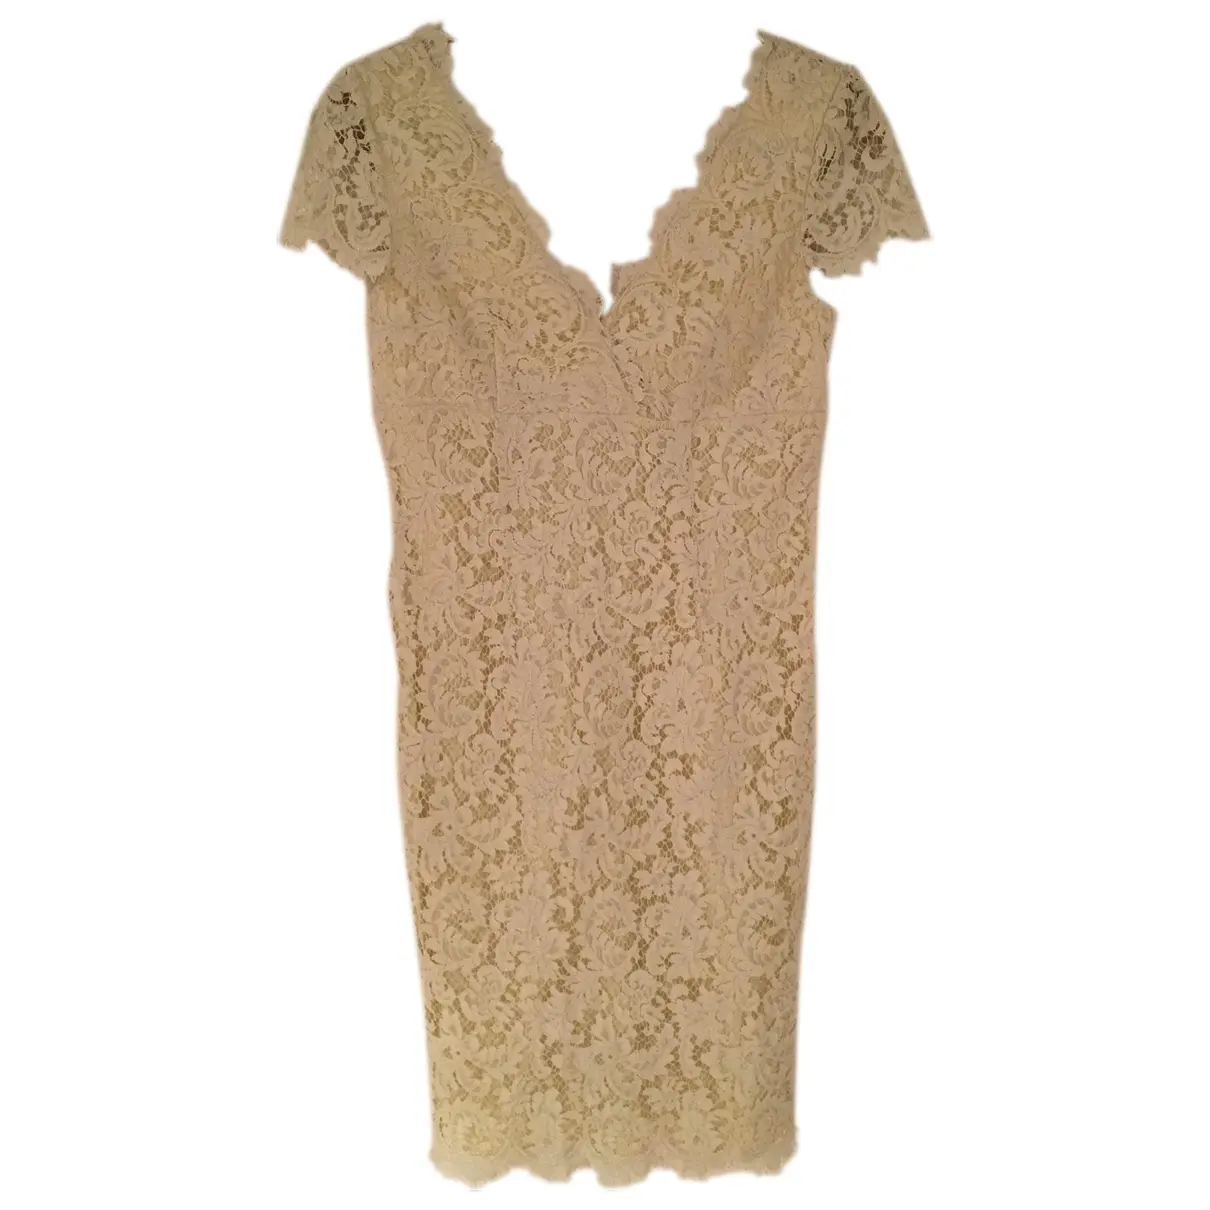 Lace mid-length dress Louise Kennedy